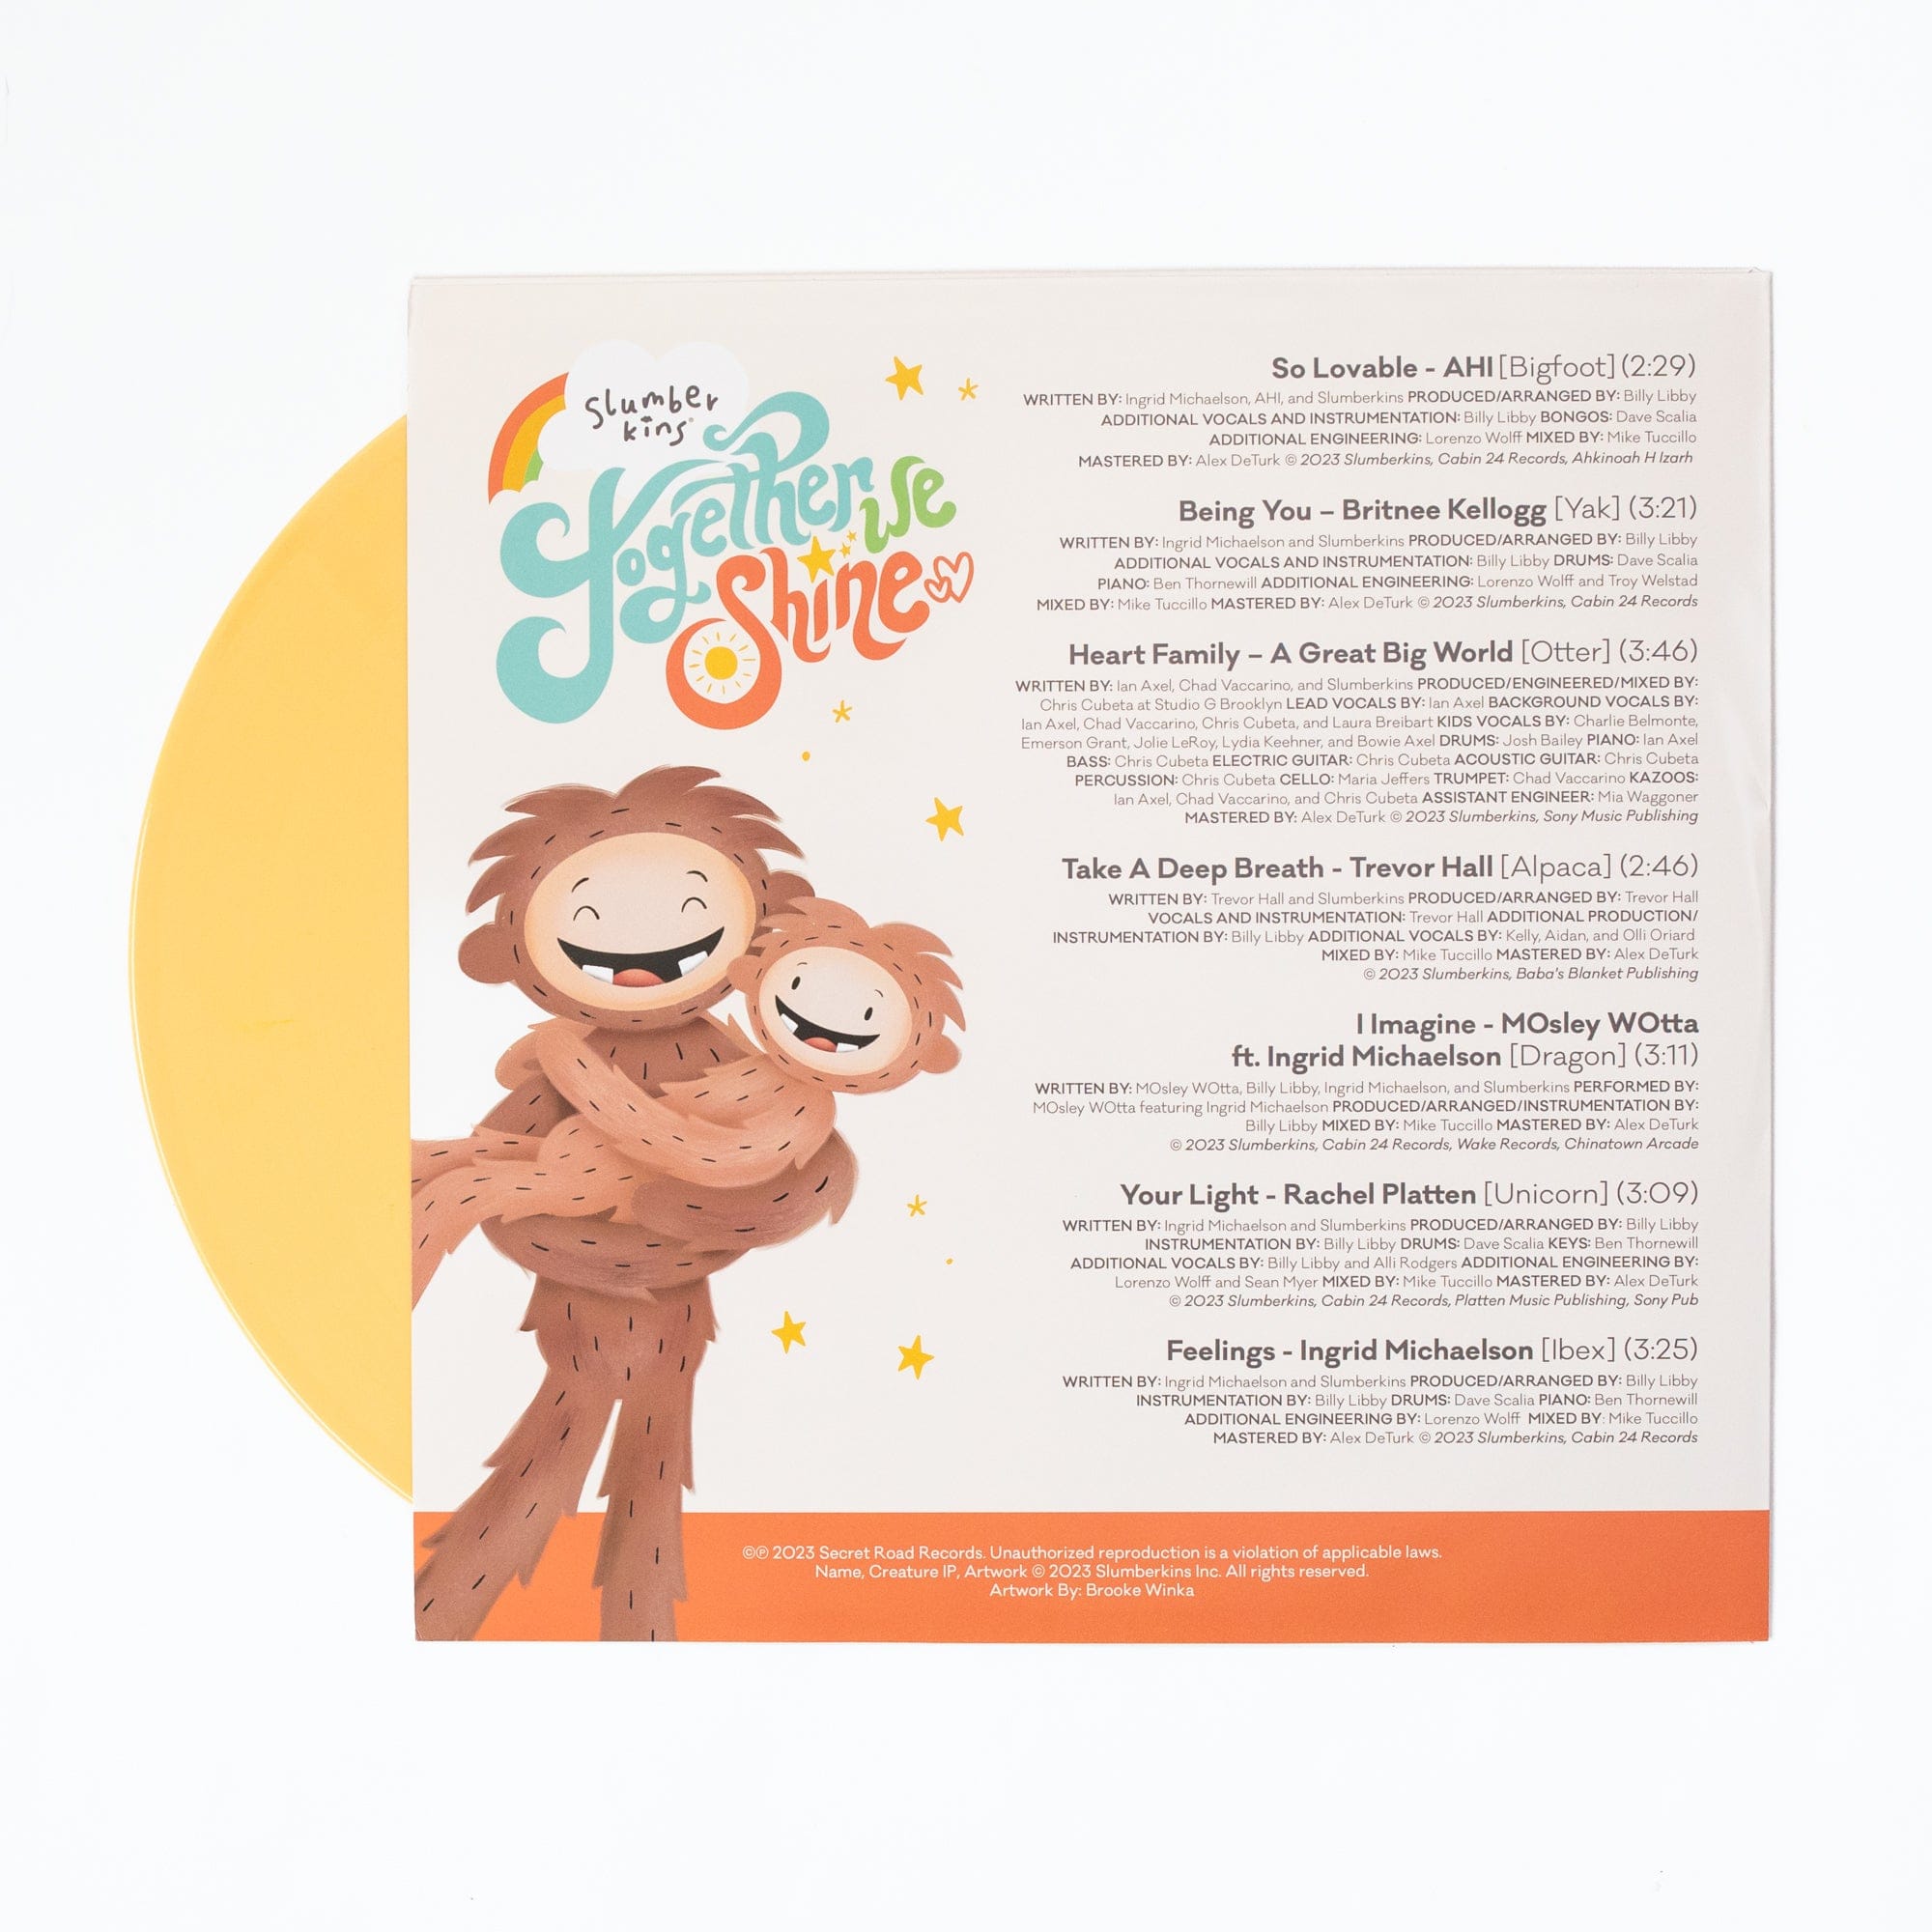 Sunshine Yellow Together We Shine, Vol. 1 Vinyl Record - View Product